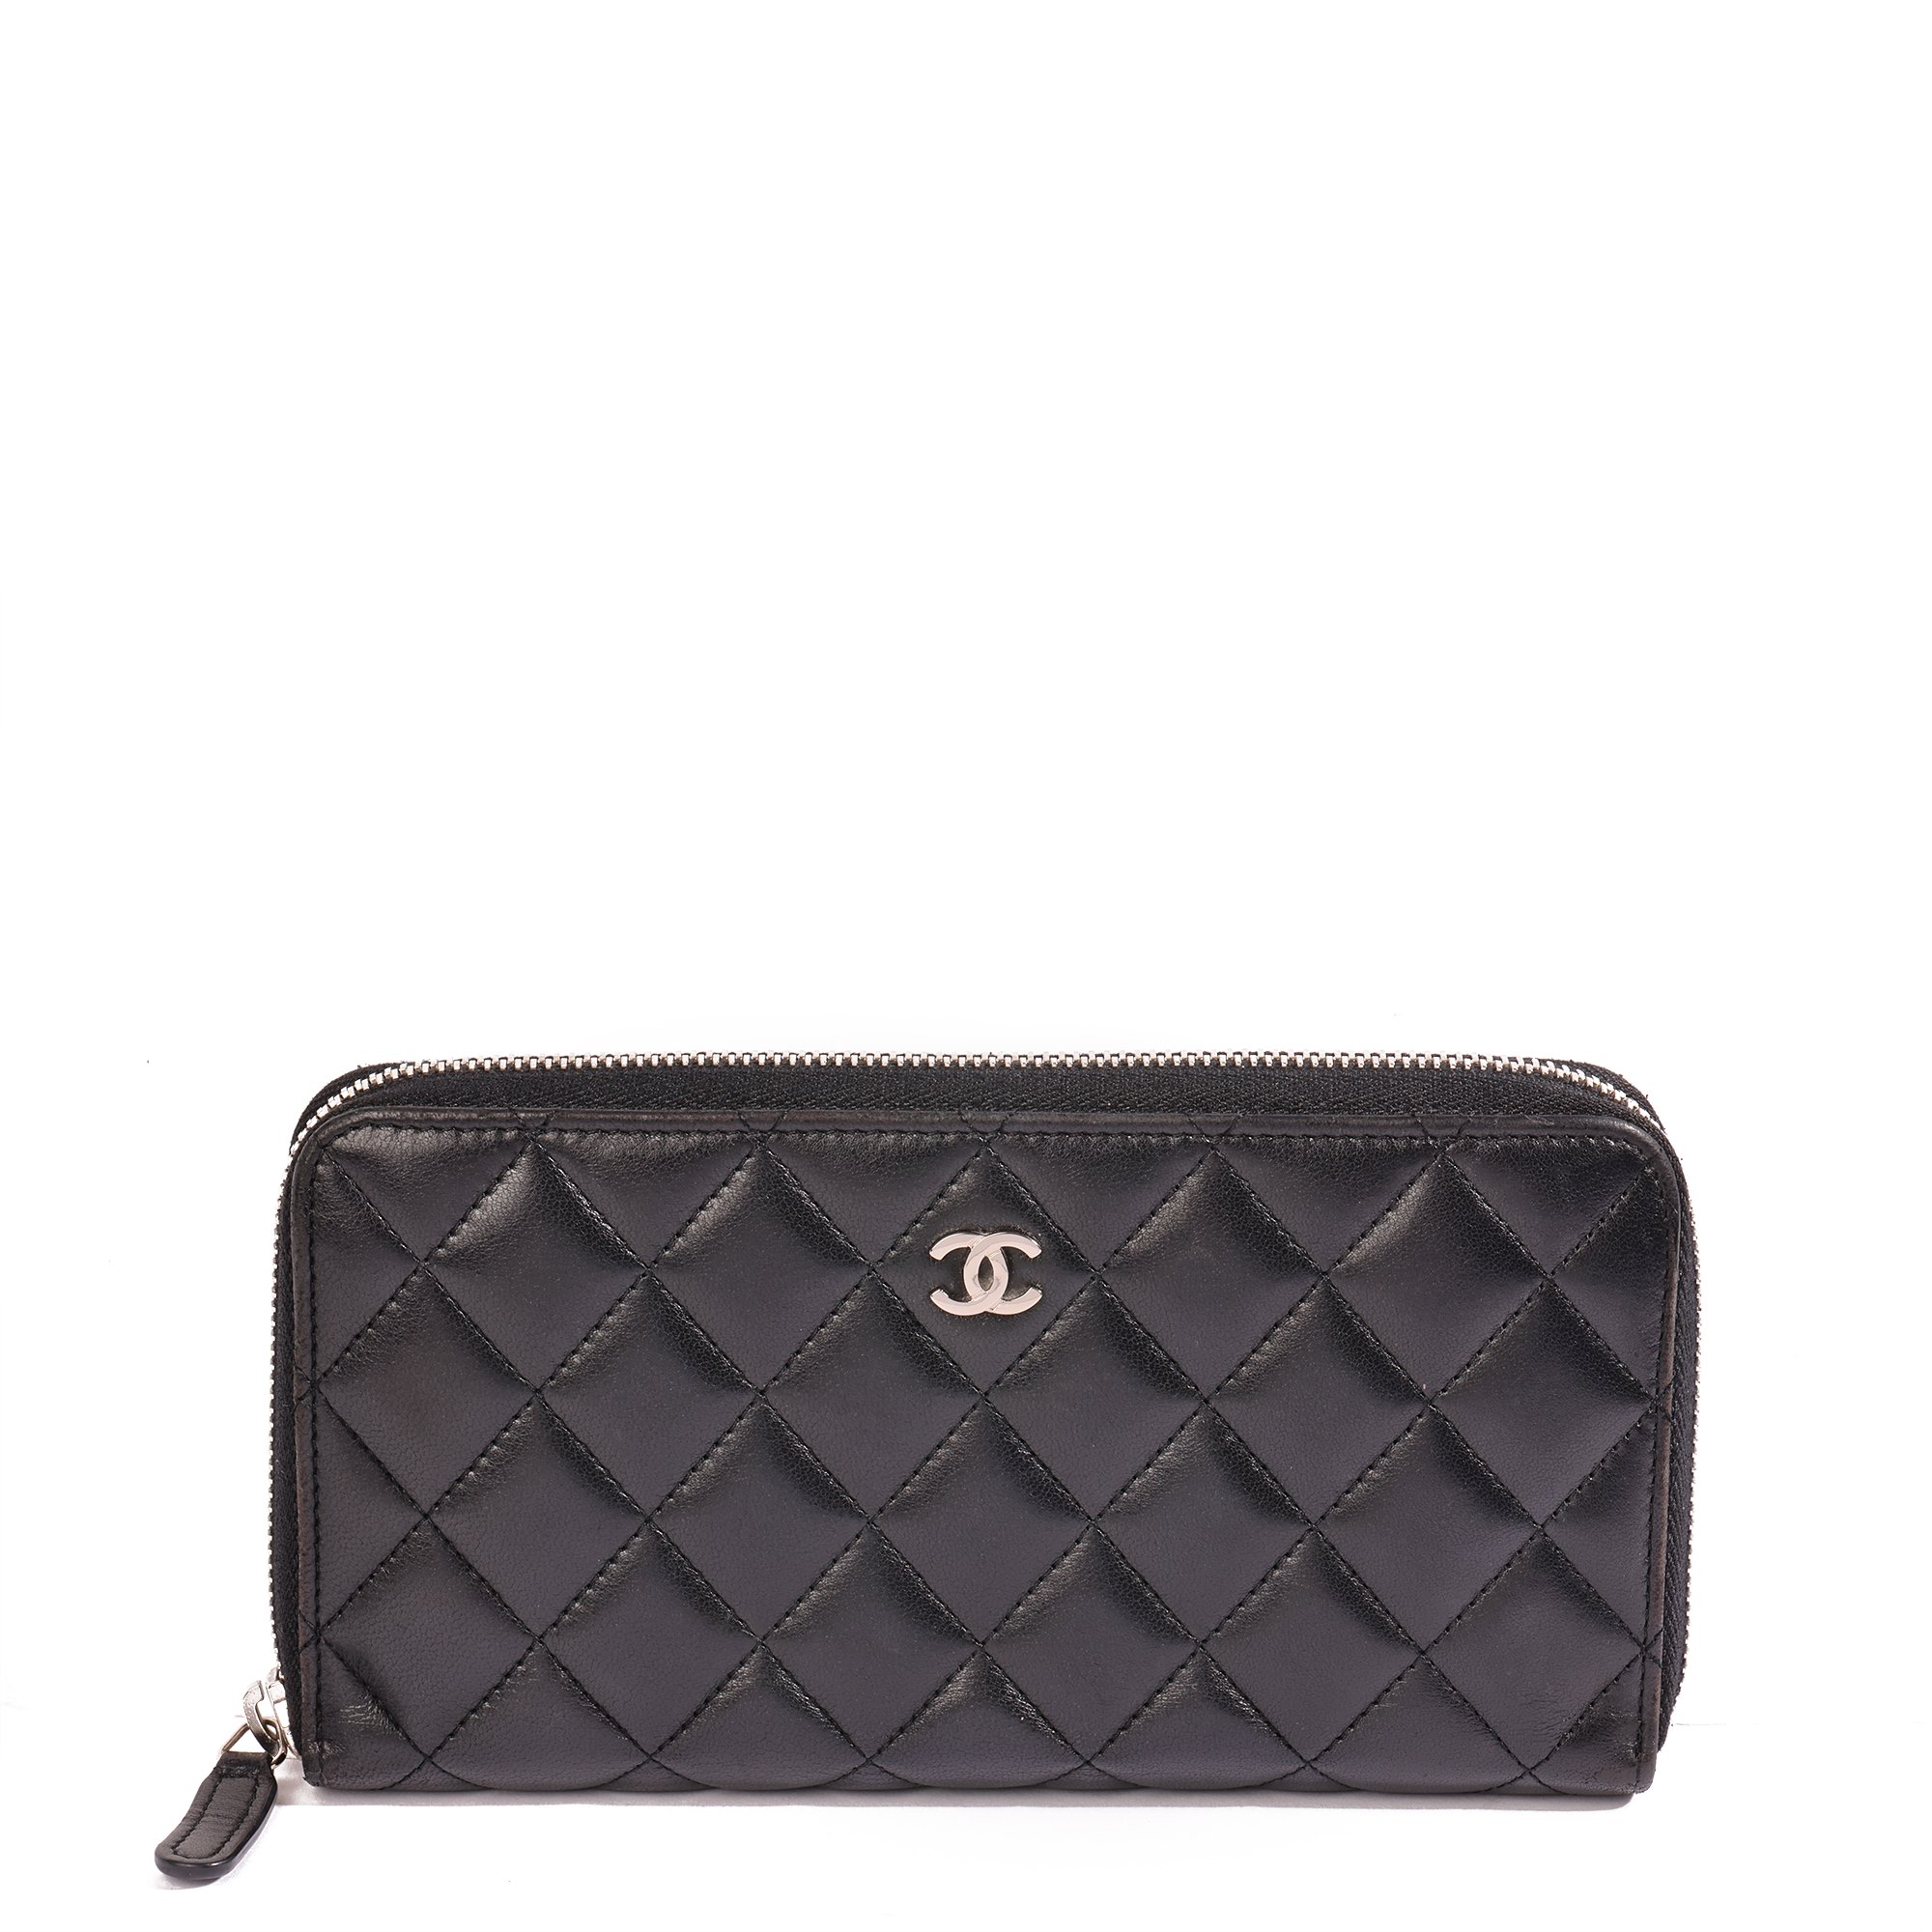 Chanel Black Quilted Lambskin Classic Long Zipped Wallet